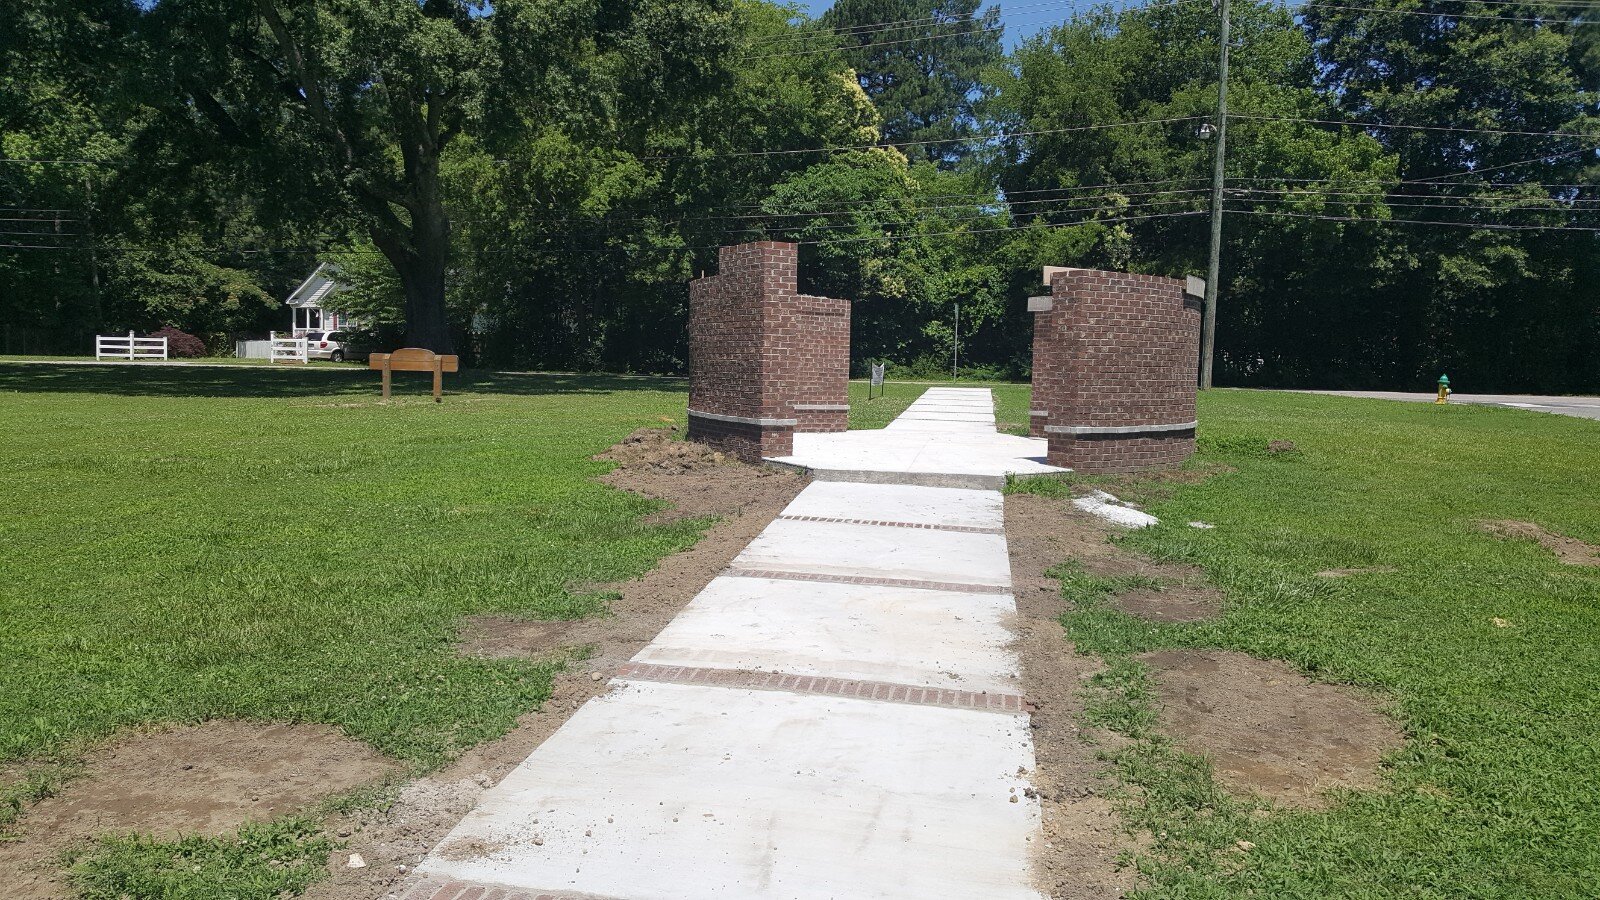  The City of Roanoke Rapids invests in sidewalks that meet the plaza.  Photo courtesy of Dr. Ervin Griffin  